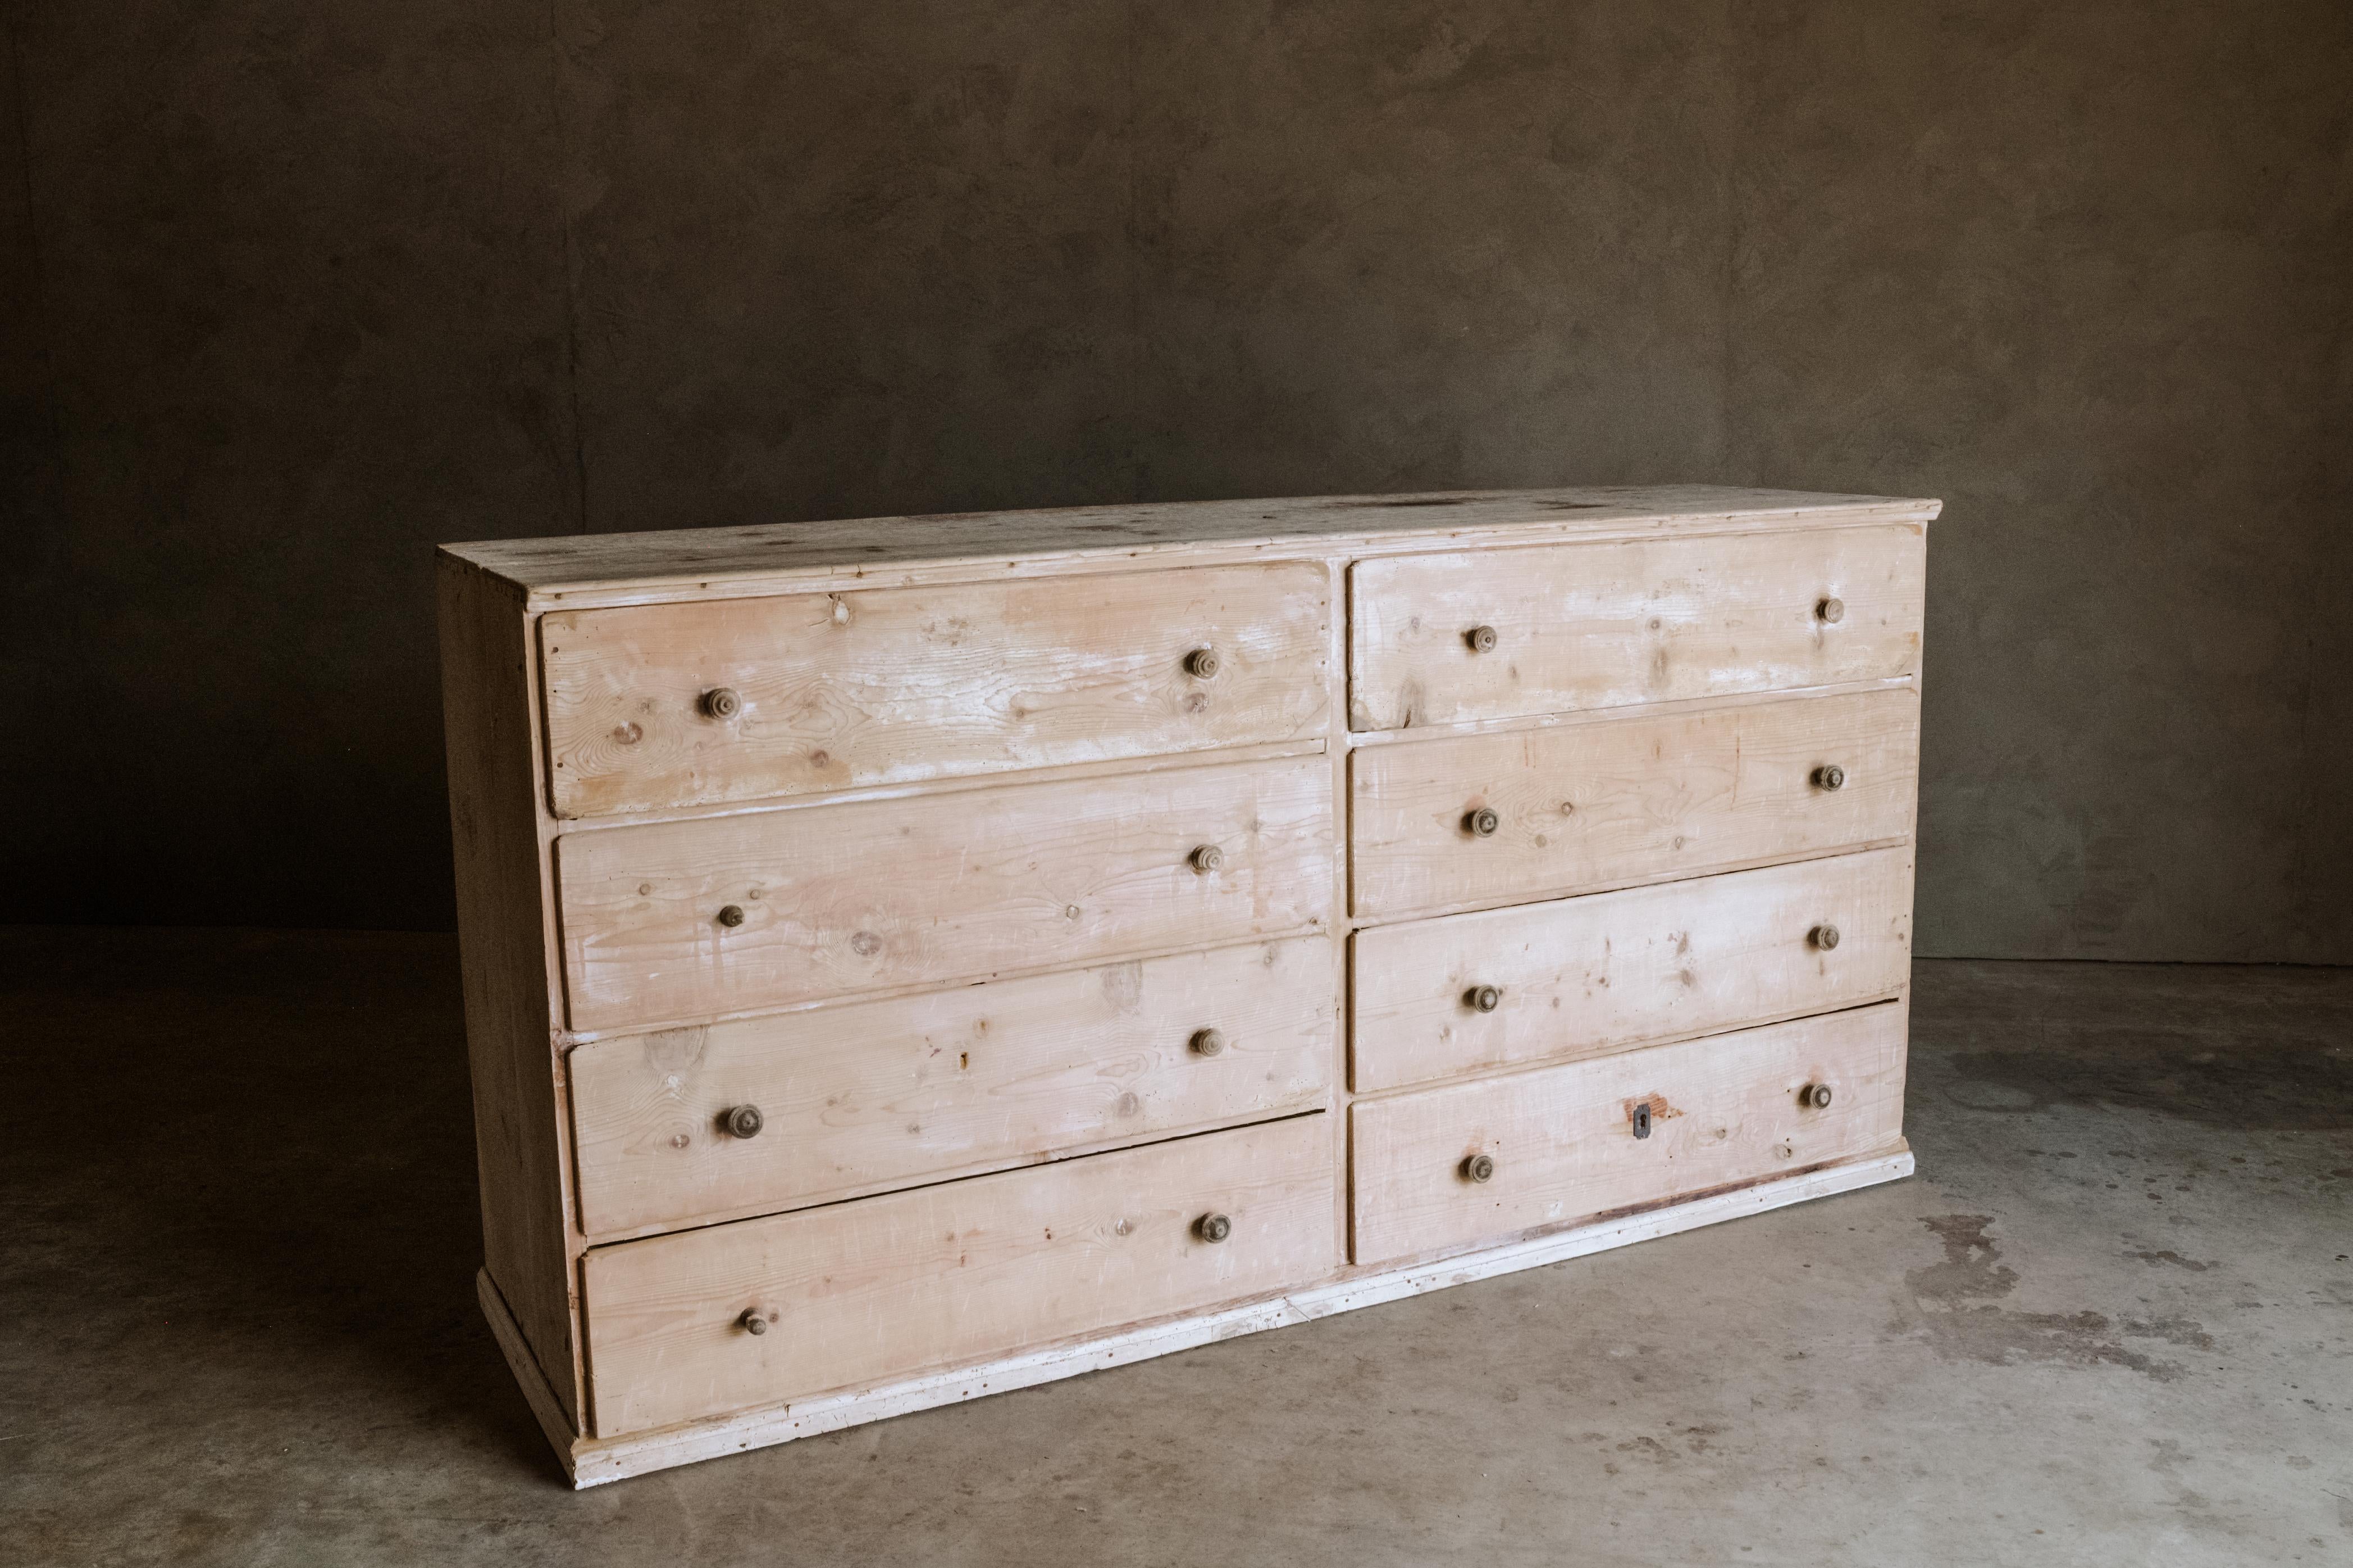 Large chest of drawers in original paint From Italy, Circa 1880. Solid pine construction with eight sliding drawers. Fantastic original color and patina.